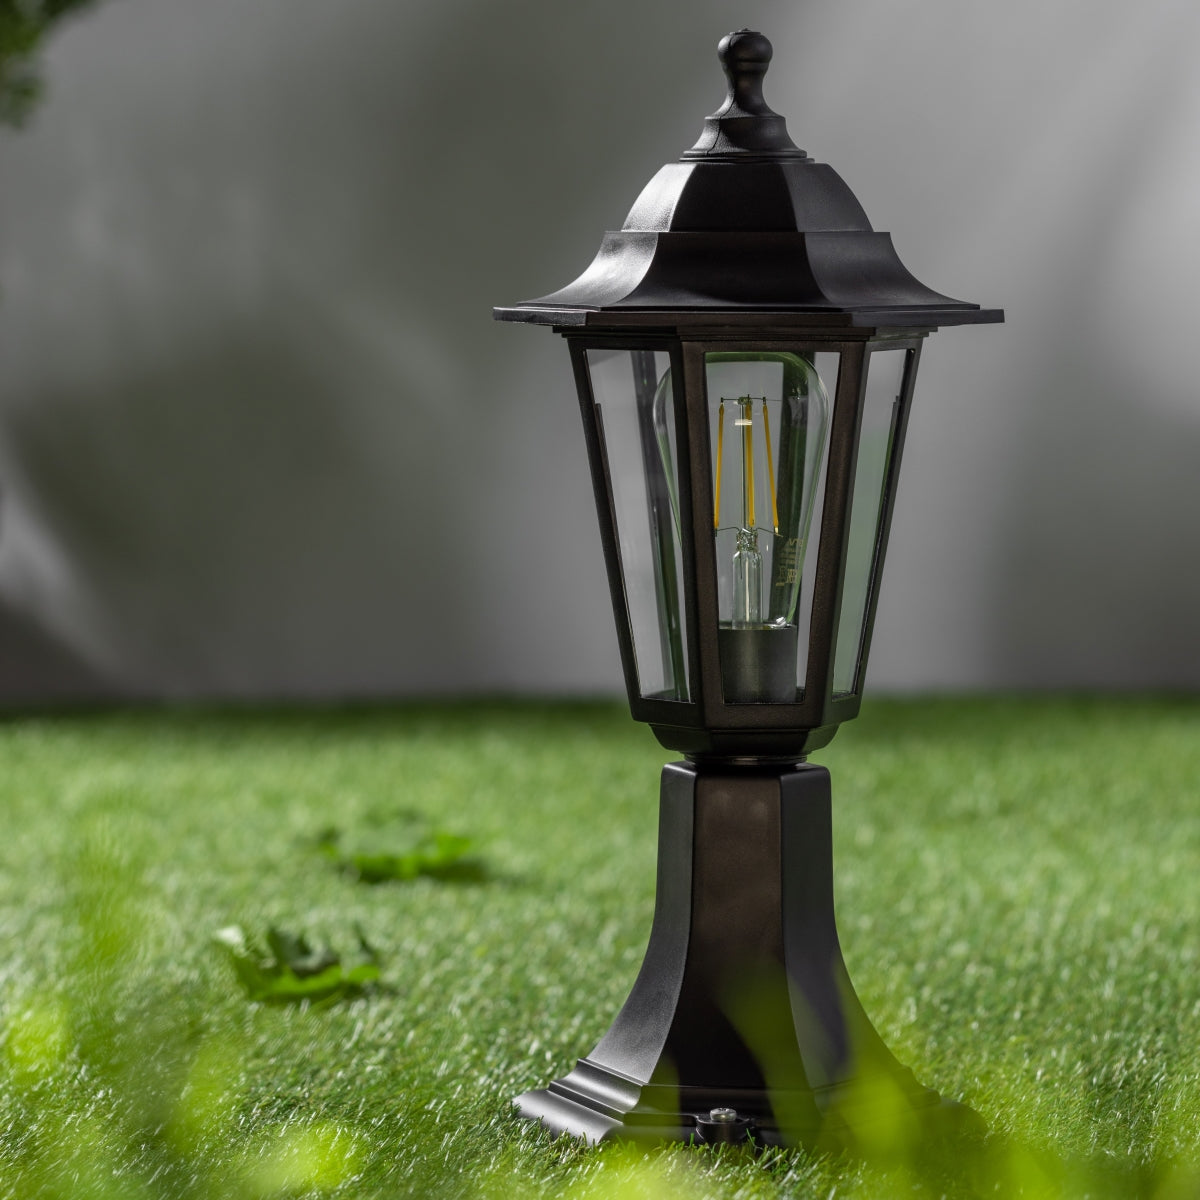 Our Yasmin lantern delivers on style and durability and is a smart choice for your exterior lighting. With its black polycarbonate construction teamed with clear polycarbonate panes, this lantern is hardwearing and rust and weatherproof. Built for life outdoors, it has an IP44 rating which means it can withstand the harshest of weather conditions. For sophisticated yet robust outdoor lighting, our Yasmin black outdoor traditional lantern is a strong contender.